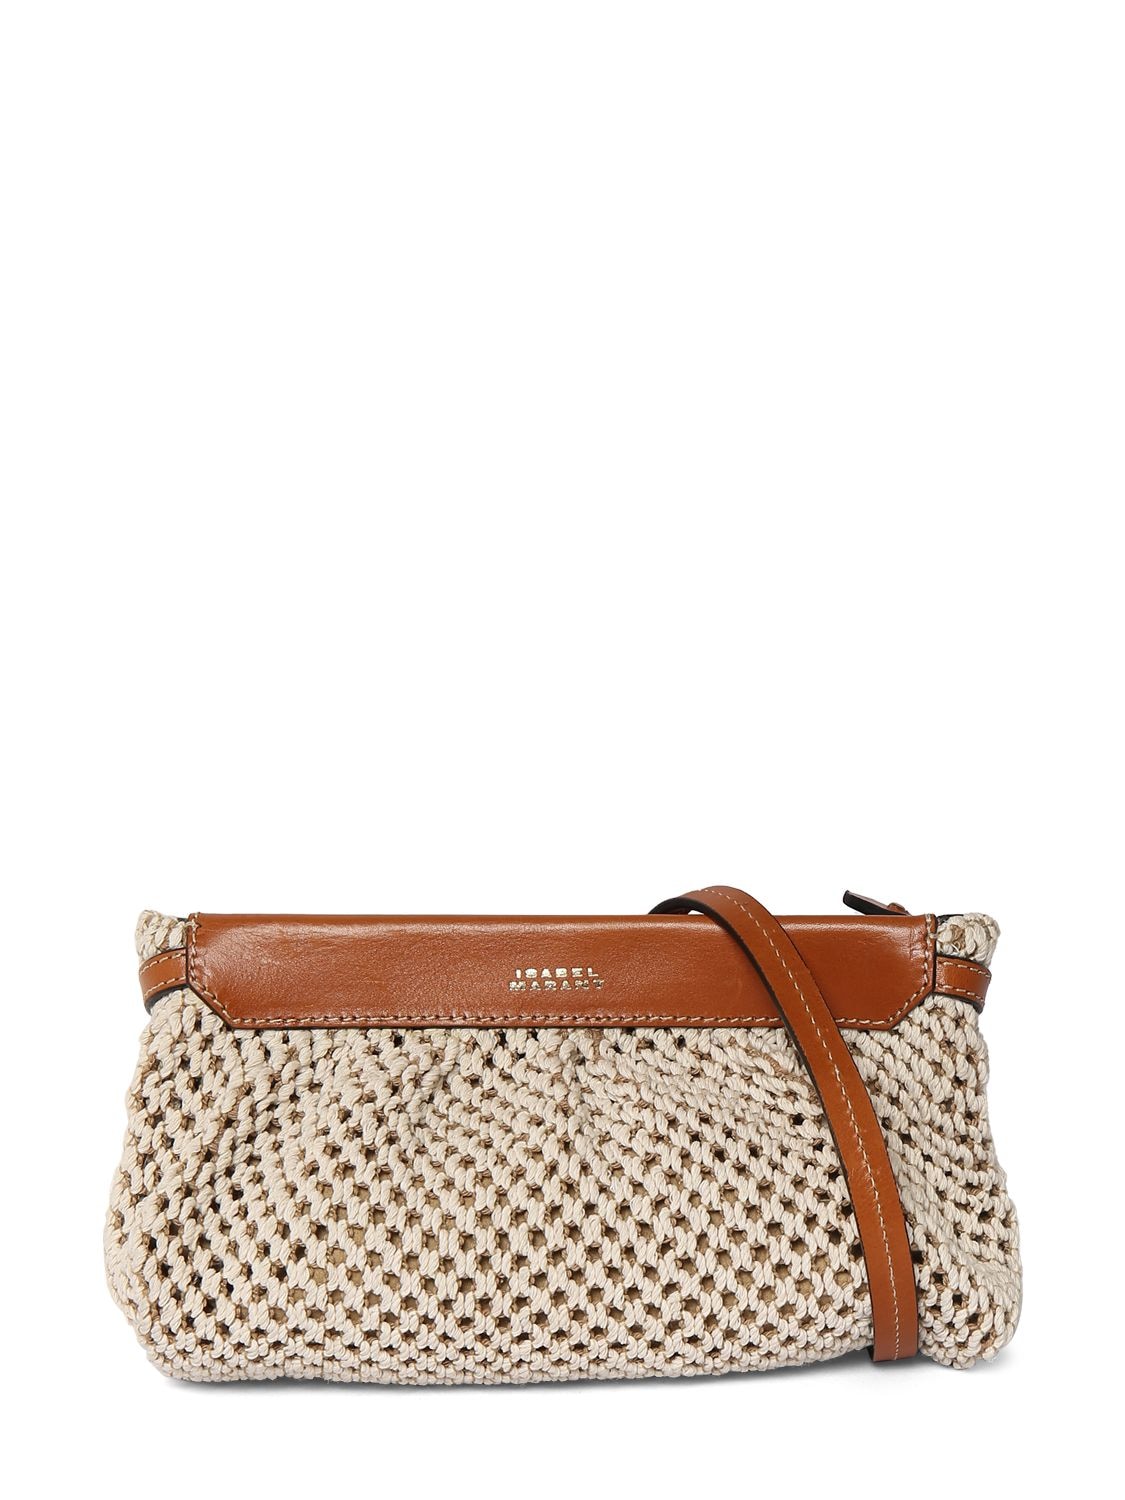 ISABEL MARANT LUZ SMALL LEATHER & COTTON CLUTCH